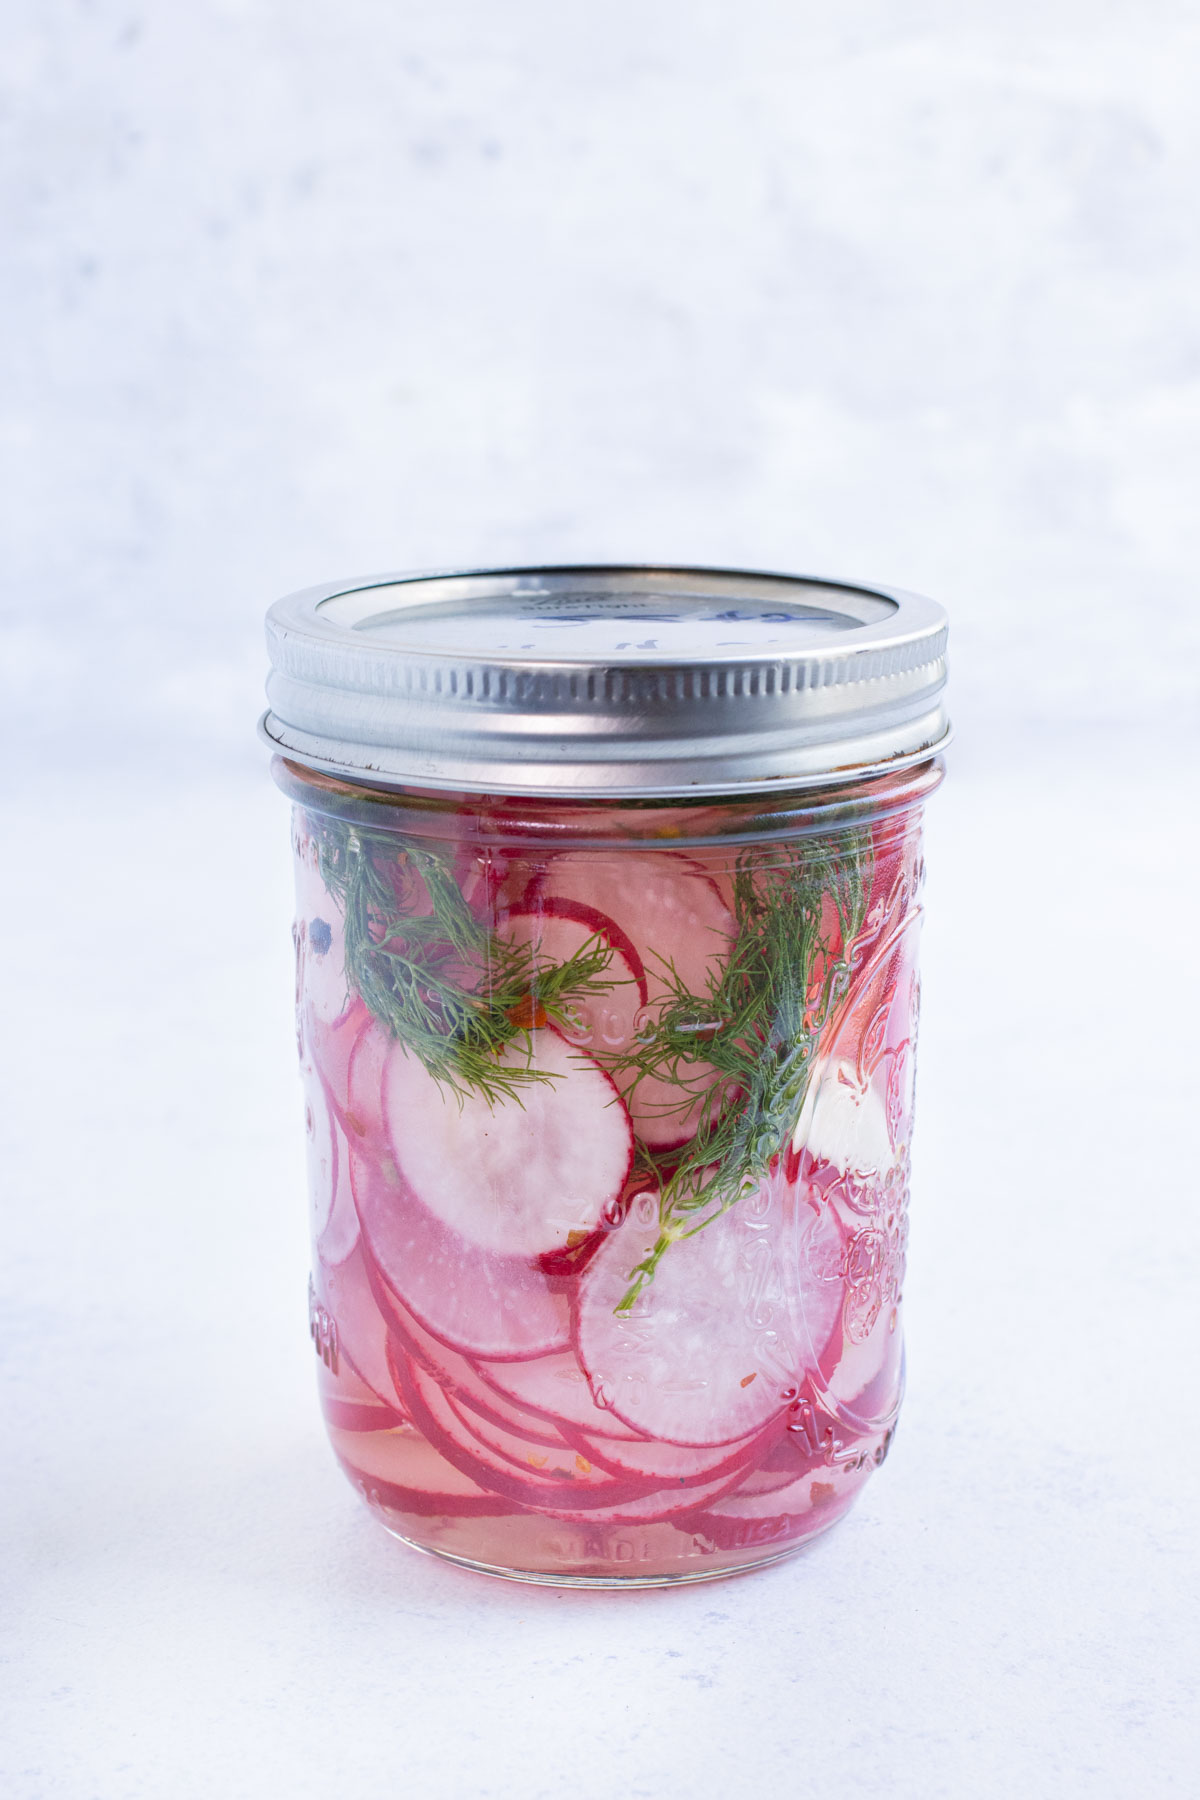 A lid is sealed onto a jar with radishes and brine.